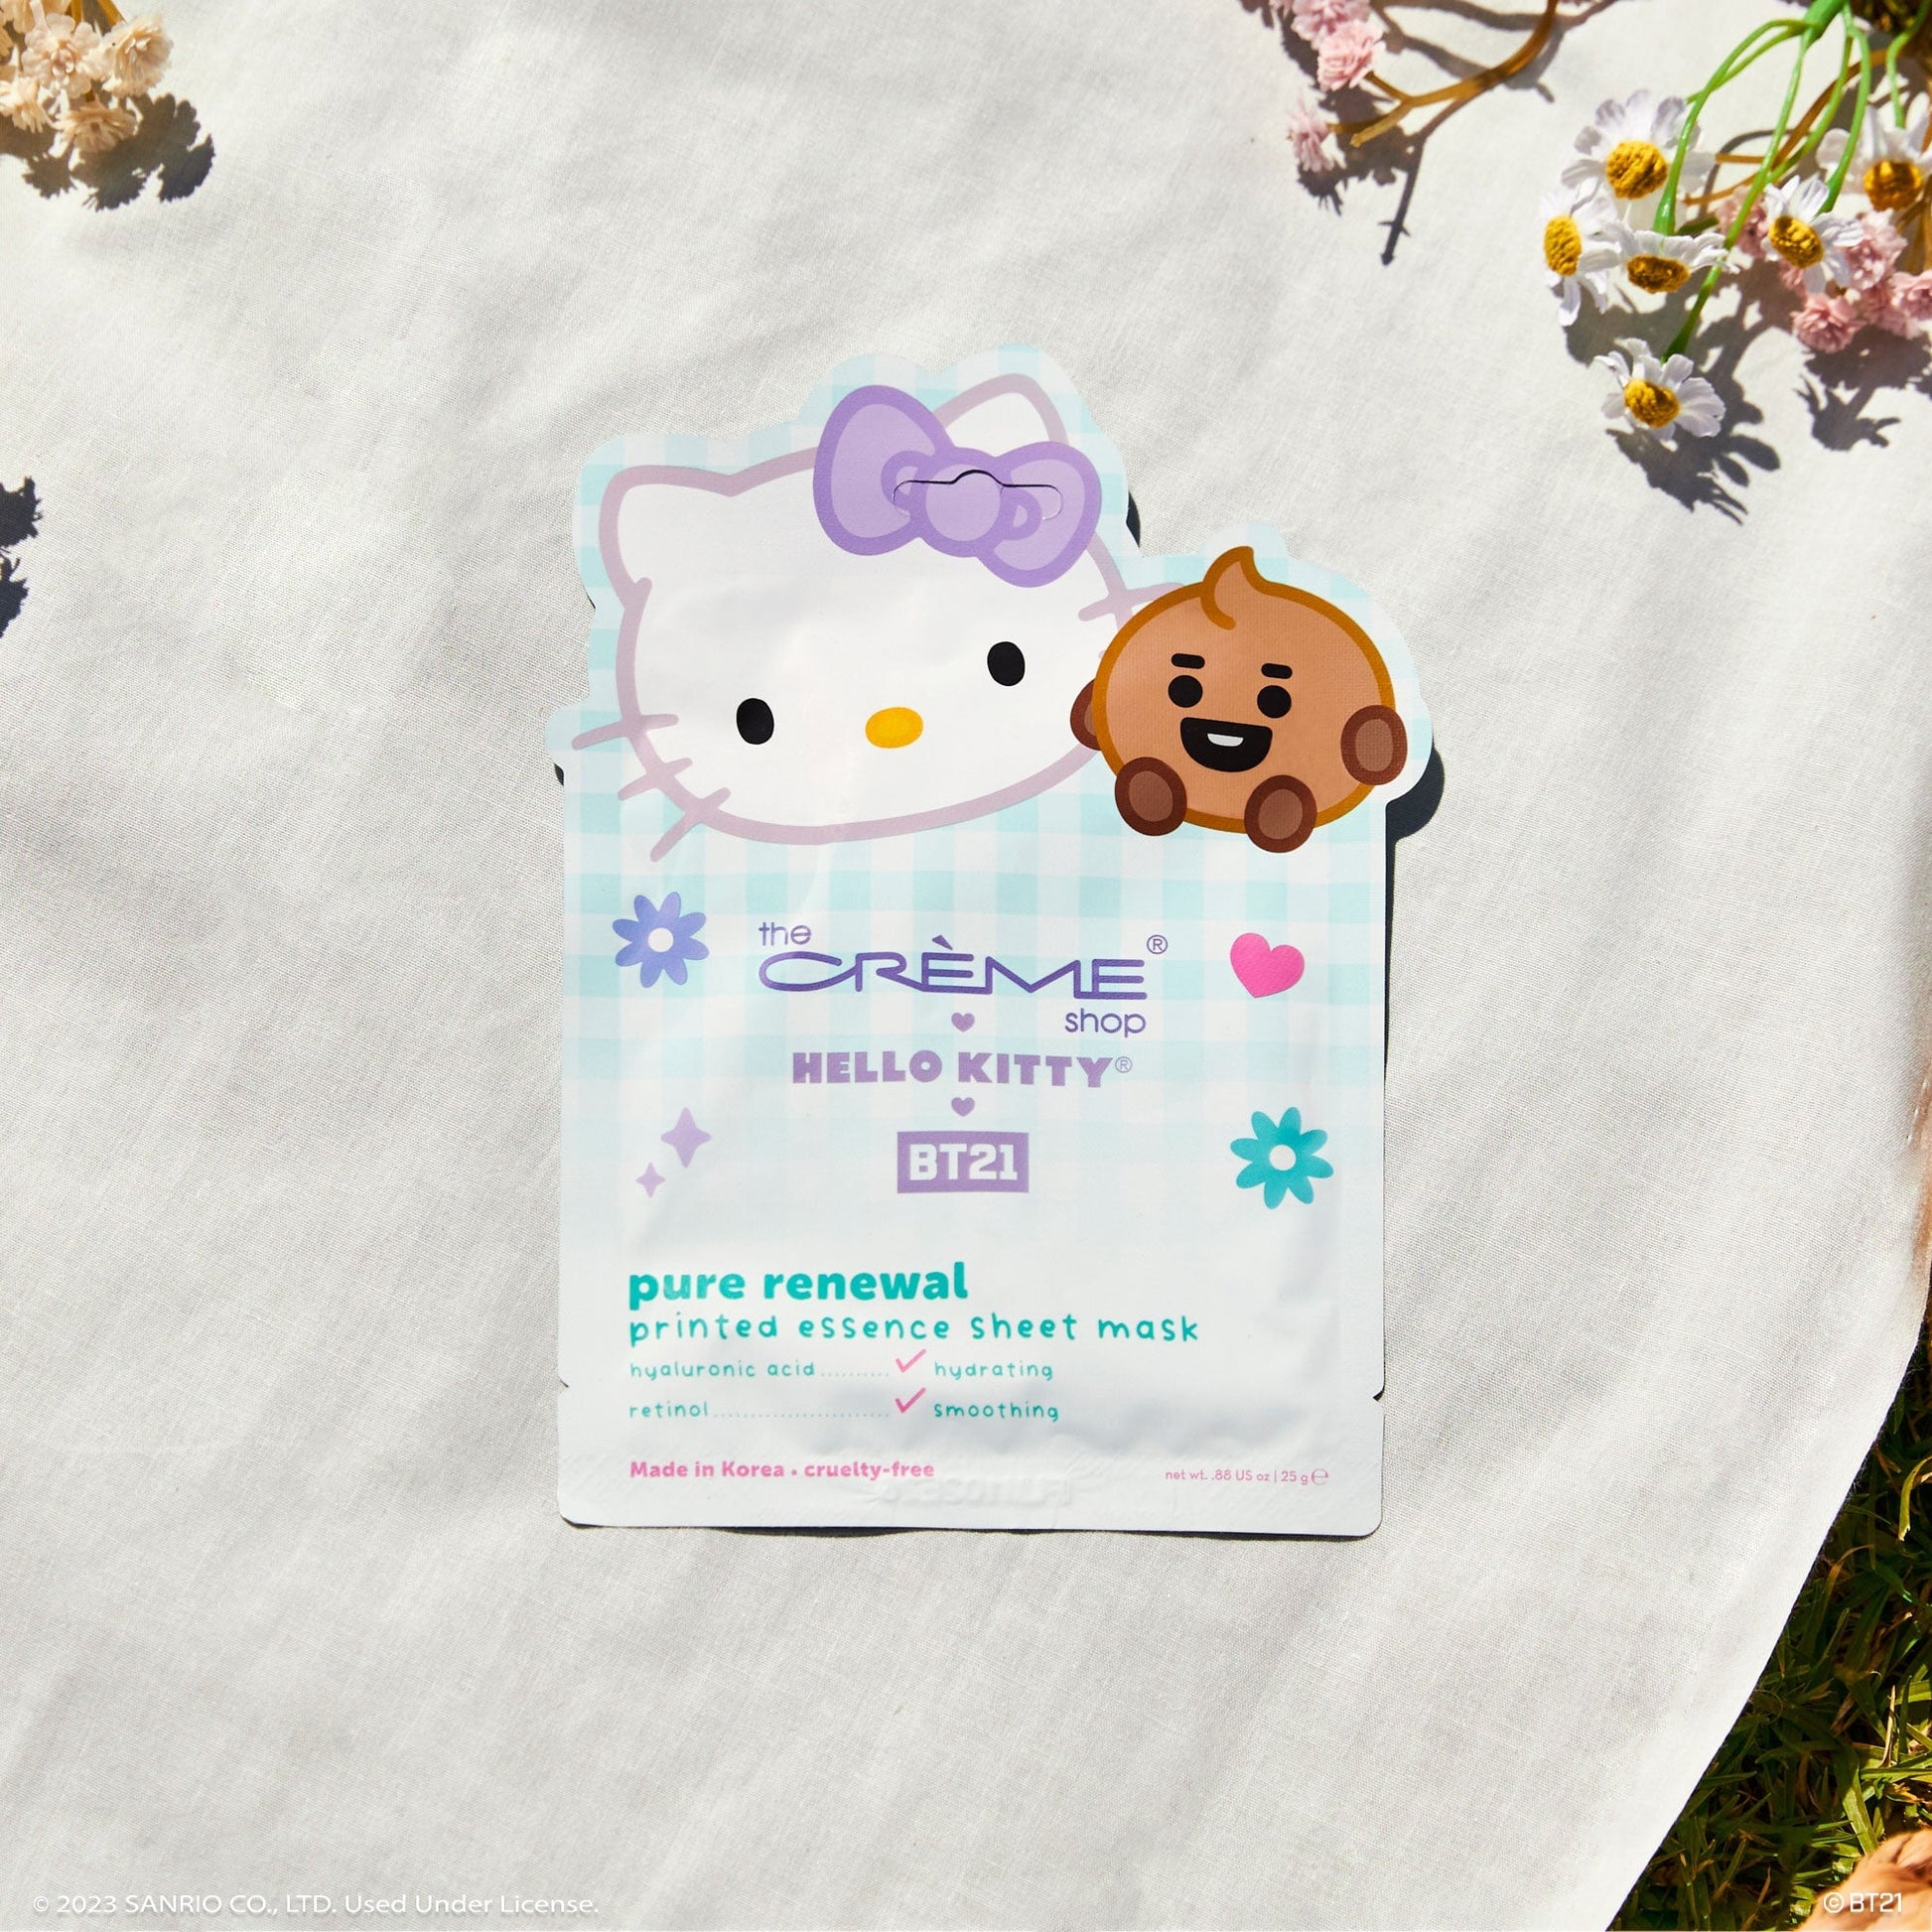 Hello Kitty & BT21 Pure Renewal Printed Essence Sheet Mask  with Hyaluronic Acid and Retinol, $4